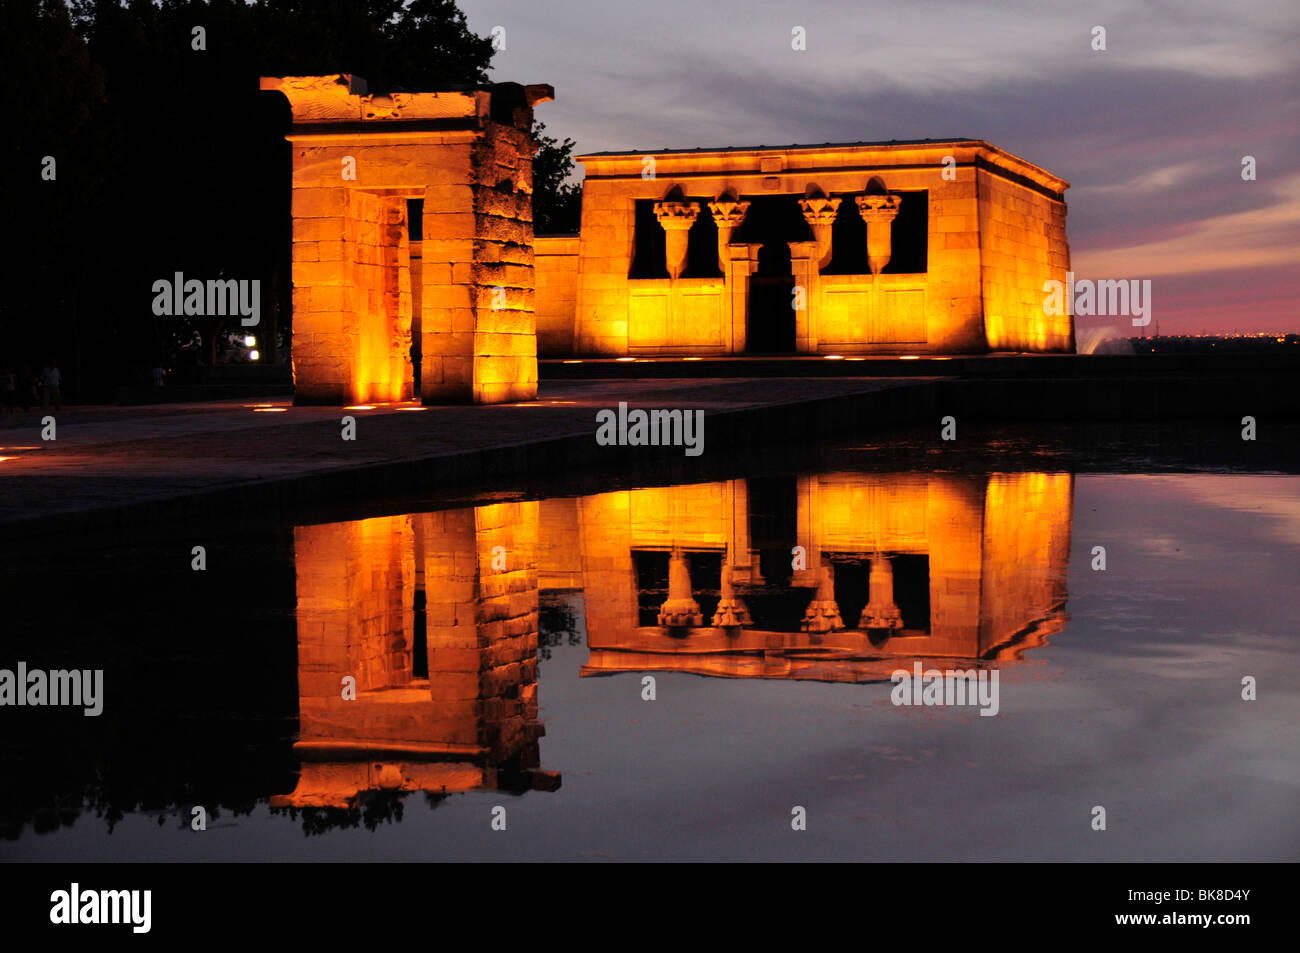 Templo de Debod, Nubian temple, dusk, a gift from the Egyptian government to Spain in 1968, Madrid, Spain, Iberian Peninsula, E Stock Photo